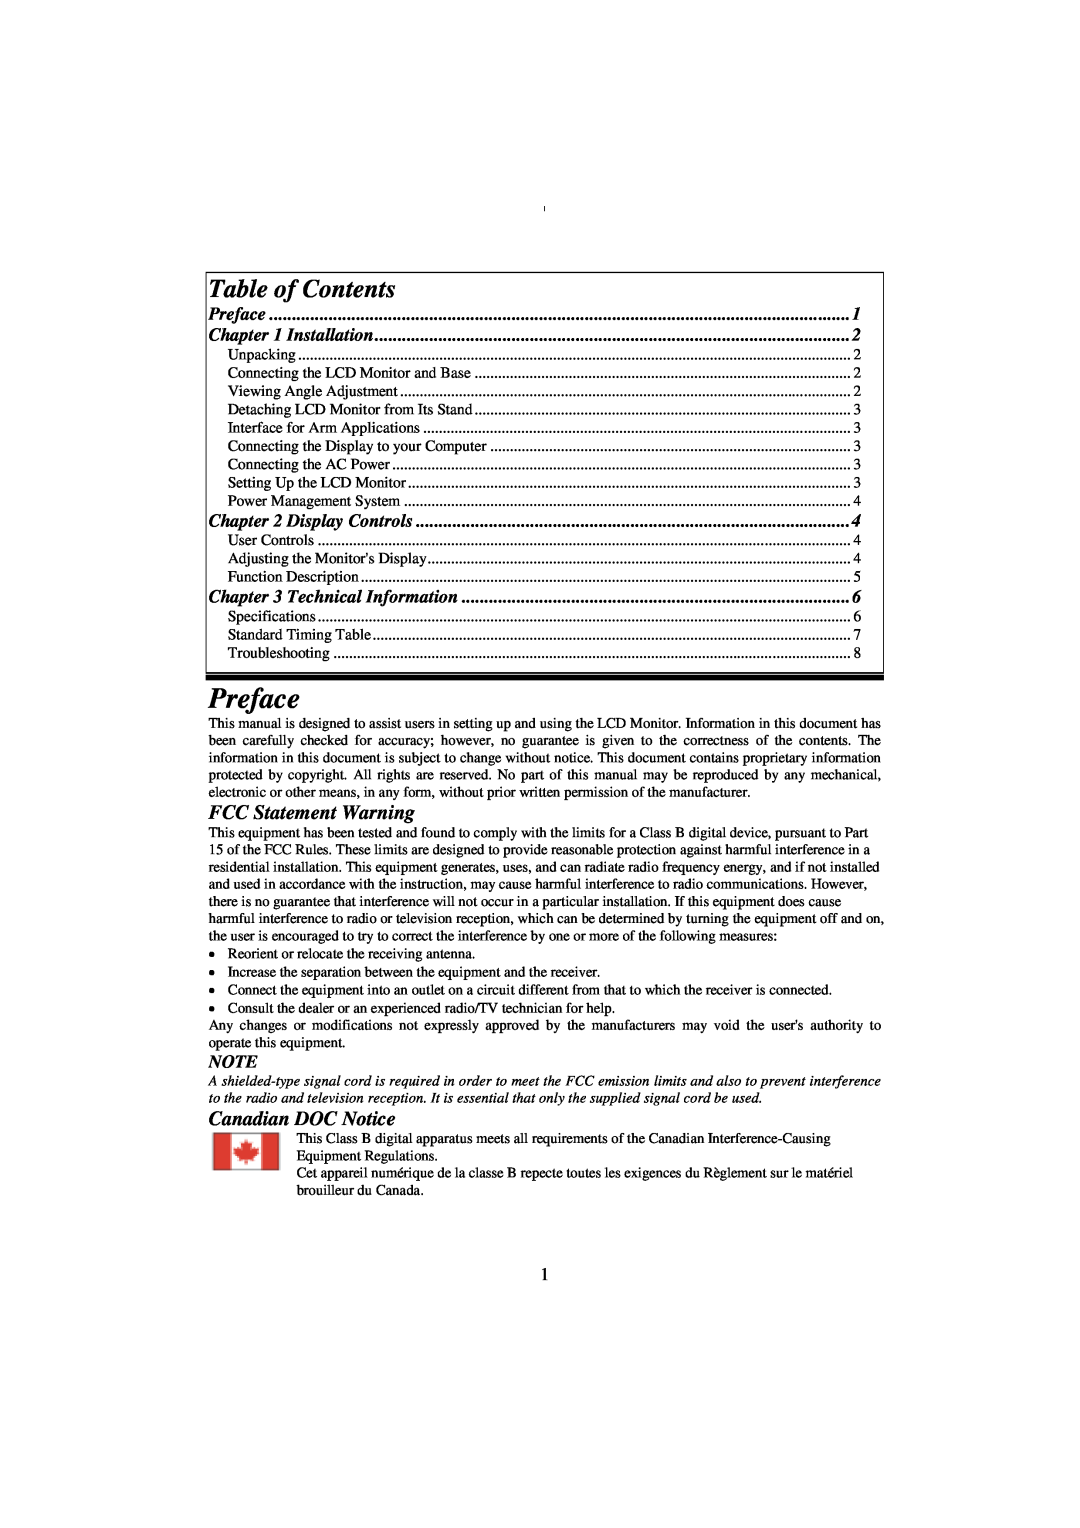 Planar PE150 Preface, FCC Statement Warning, Canadian DOC Notice, Installation, Display Controls, Technical Information 